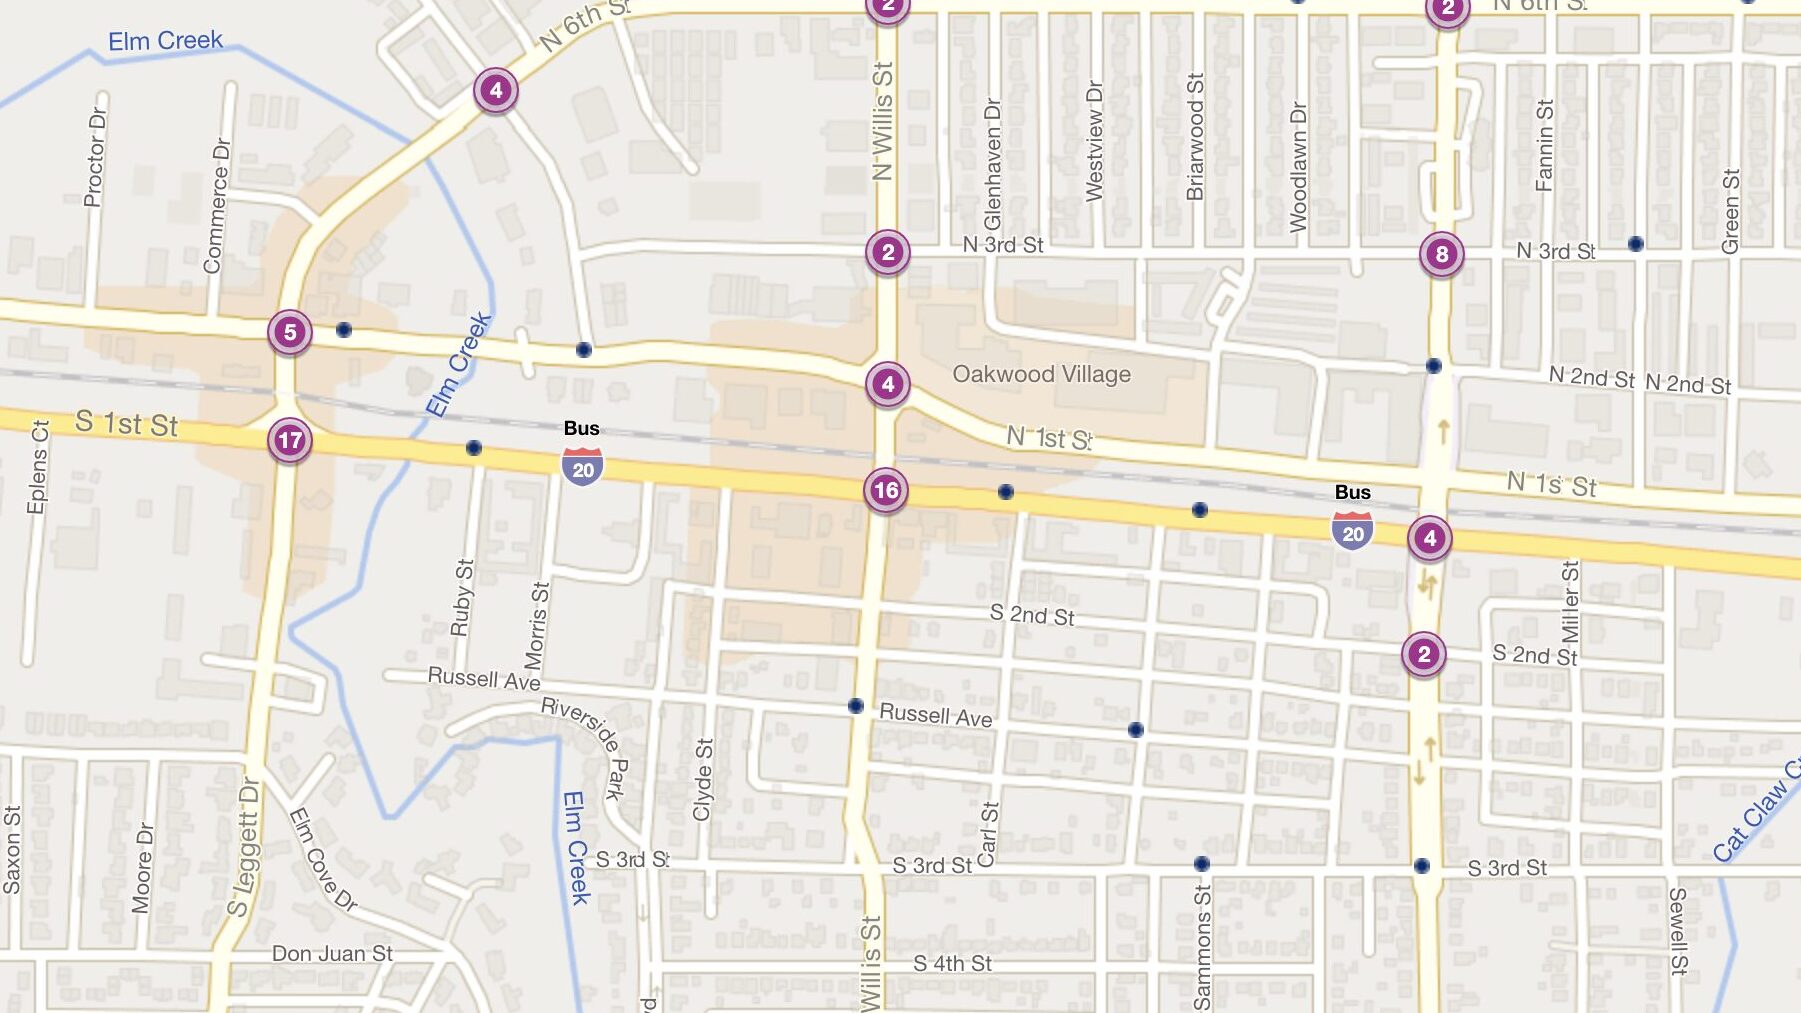 Cluster Map of 2023 Car Accidents at 1st St. (Business I-20) & N. Willis St. (TXDOT)